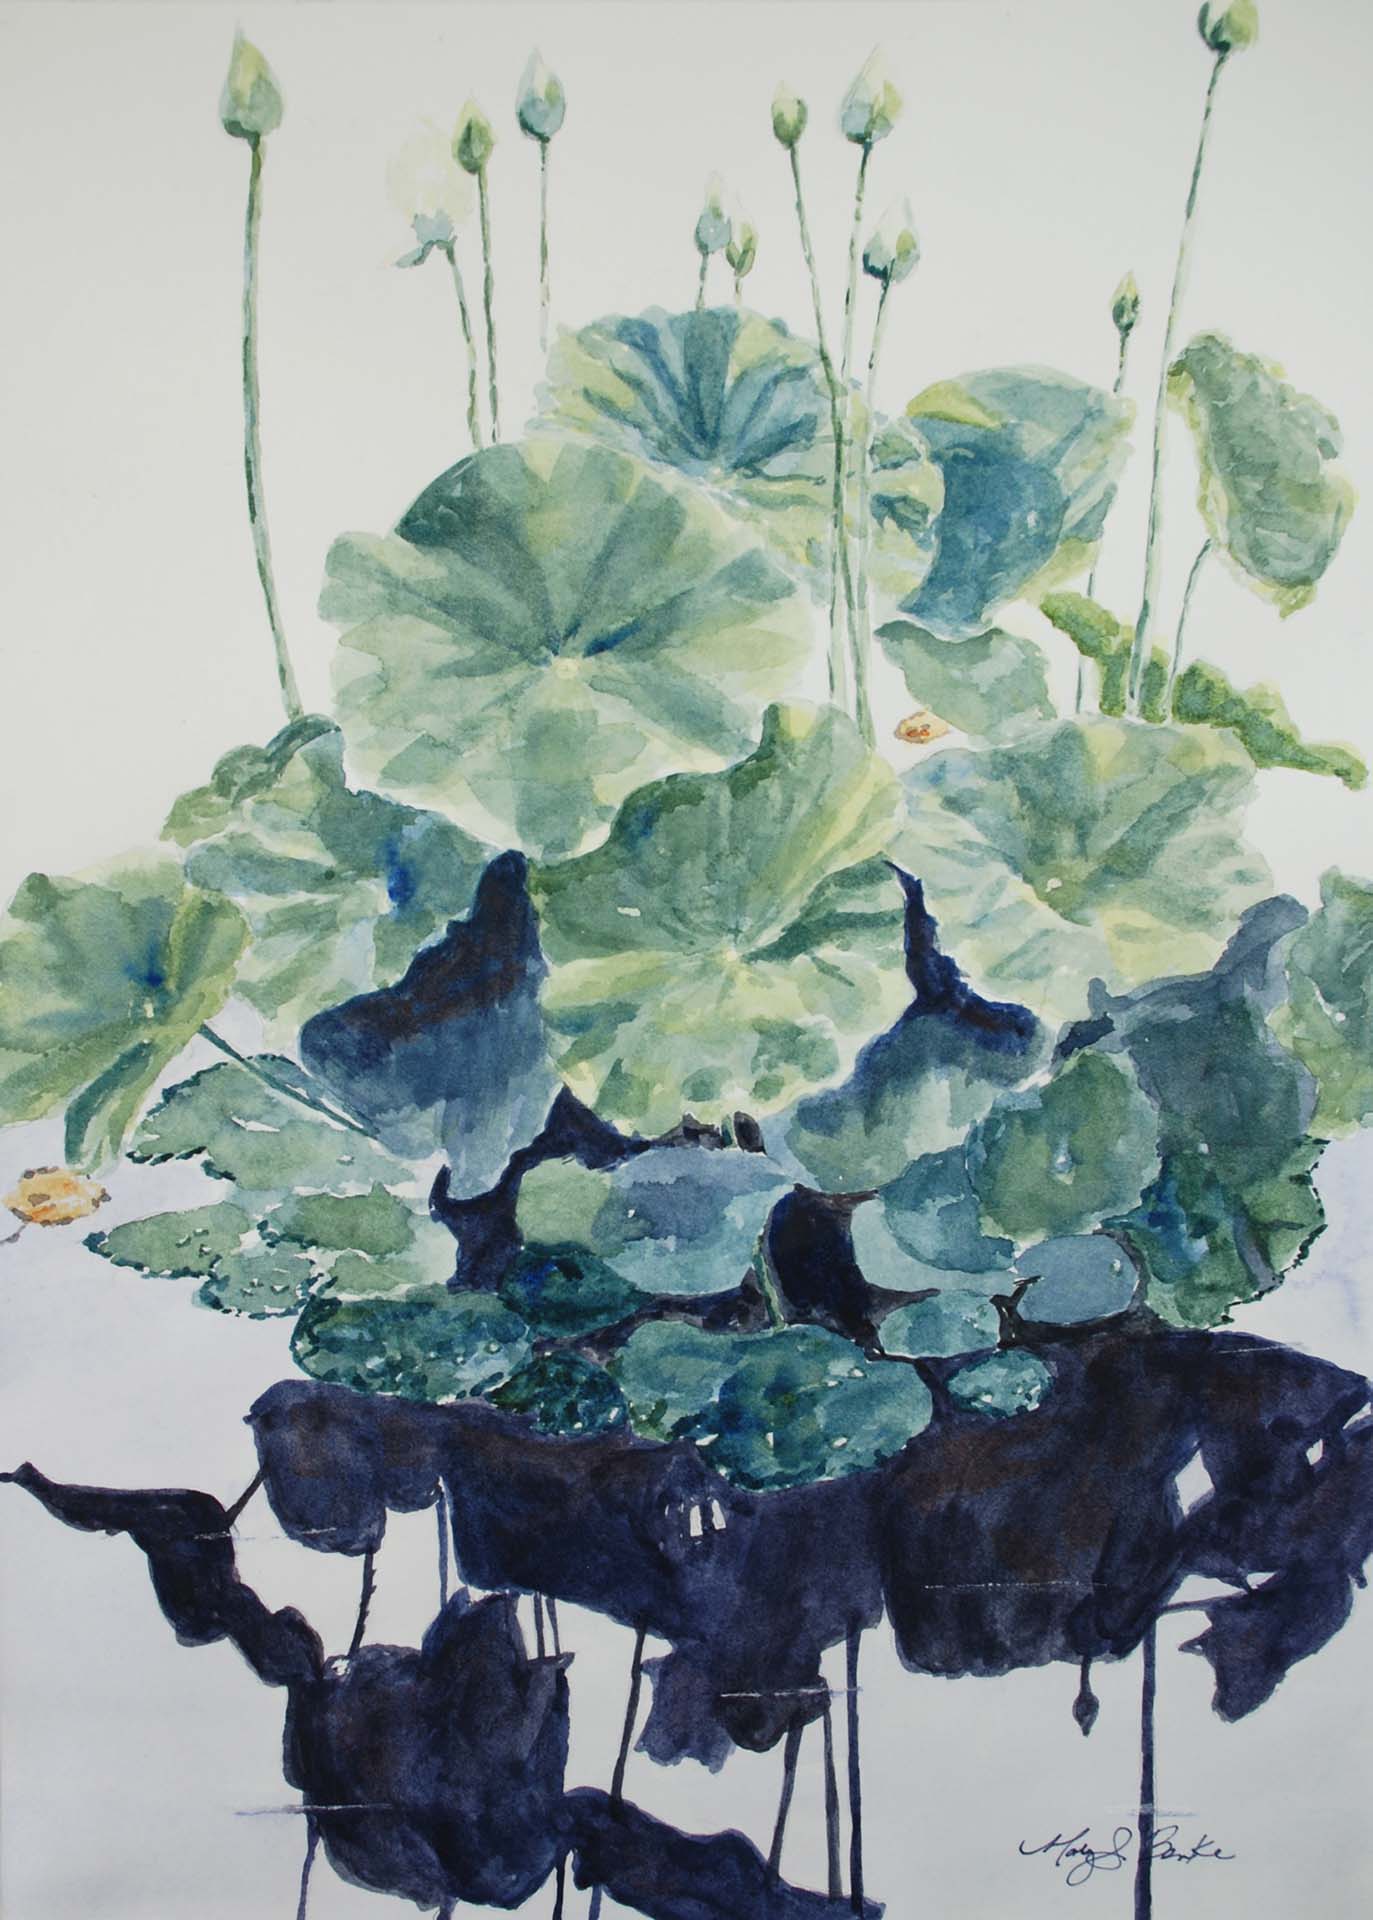 A watercolor painting of water lilies and their blooms reflected in still water with dark shadows by Mary Benke